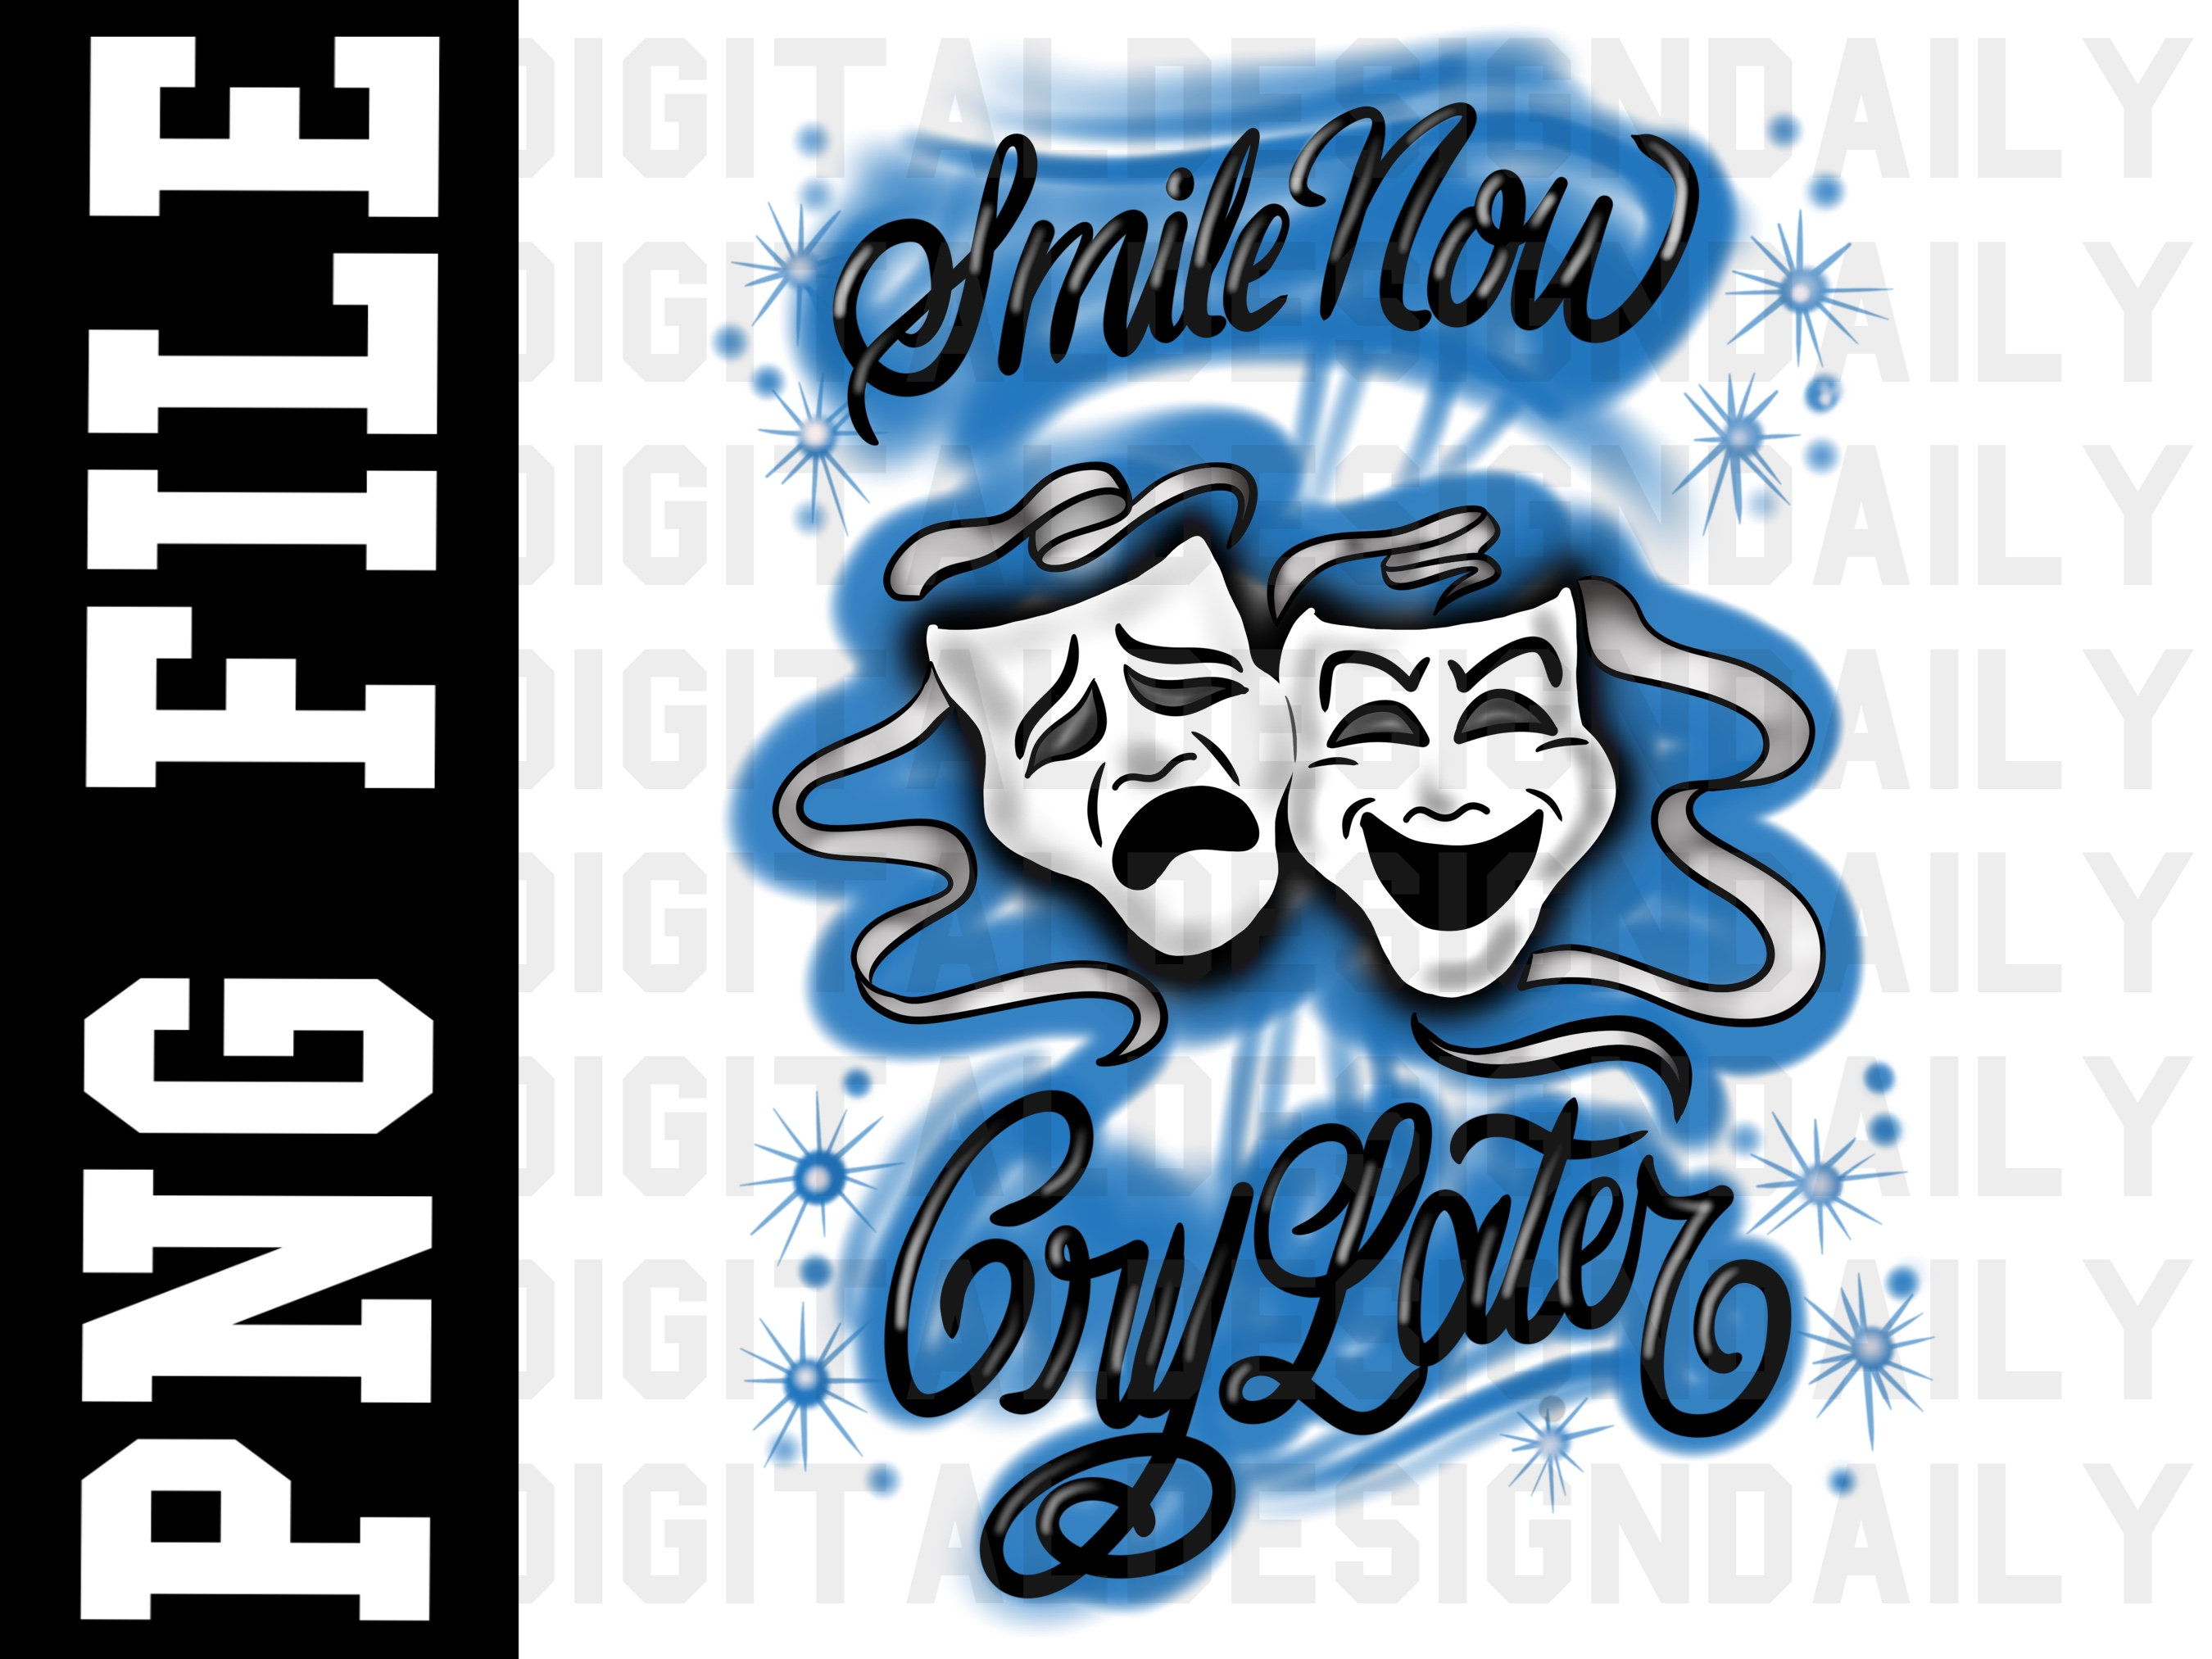 Laugh Now Cry Later Smile Now Airbrush Stencil Vinyl for Airbrush